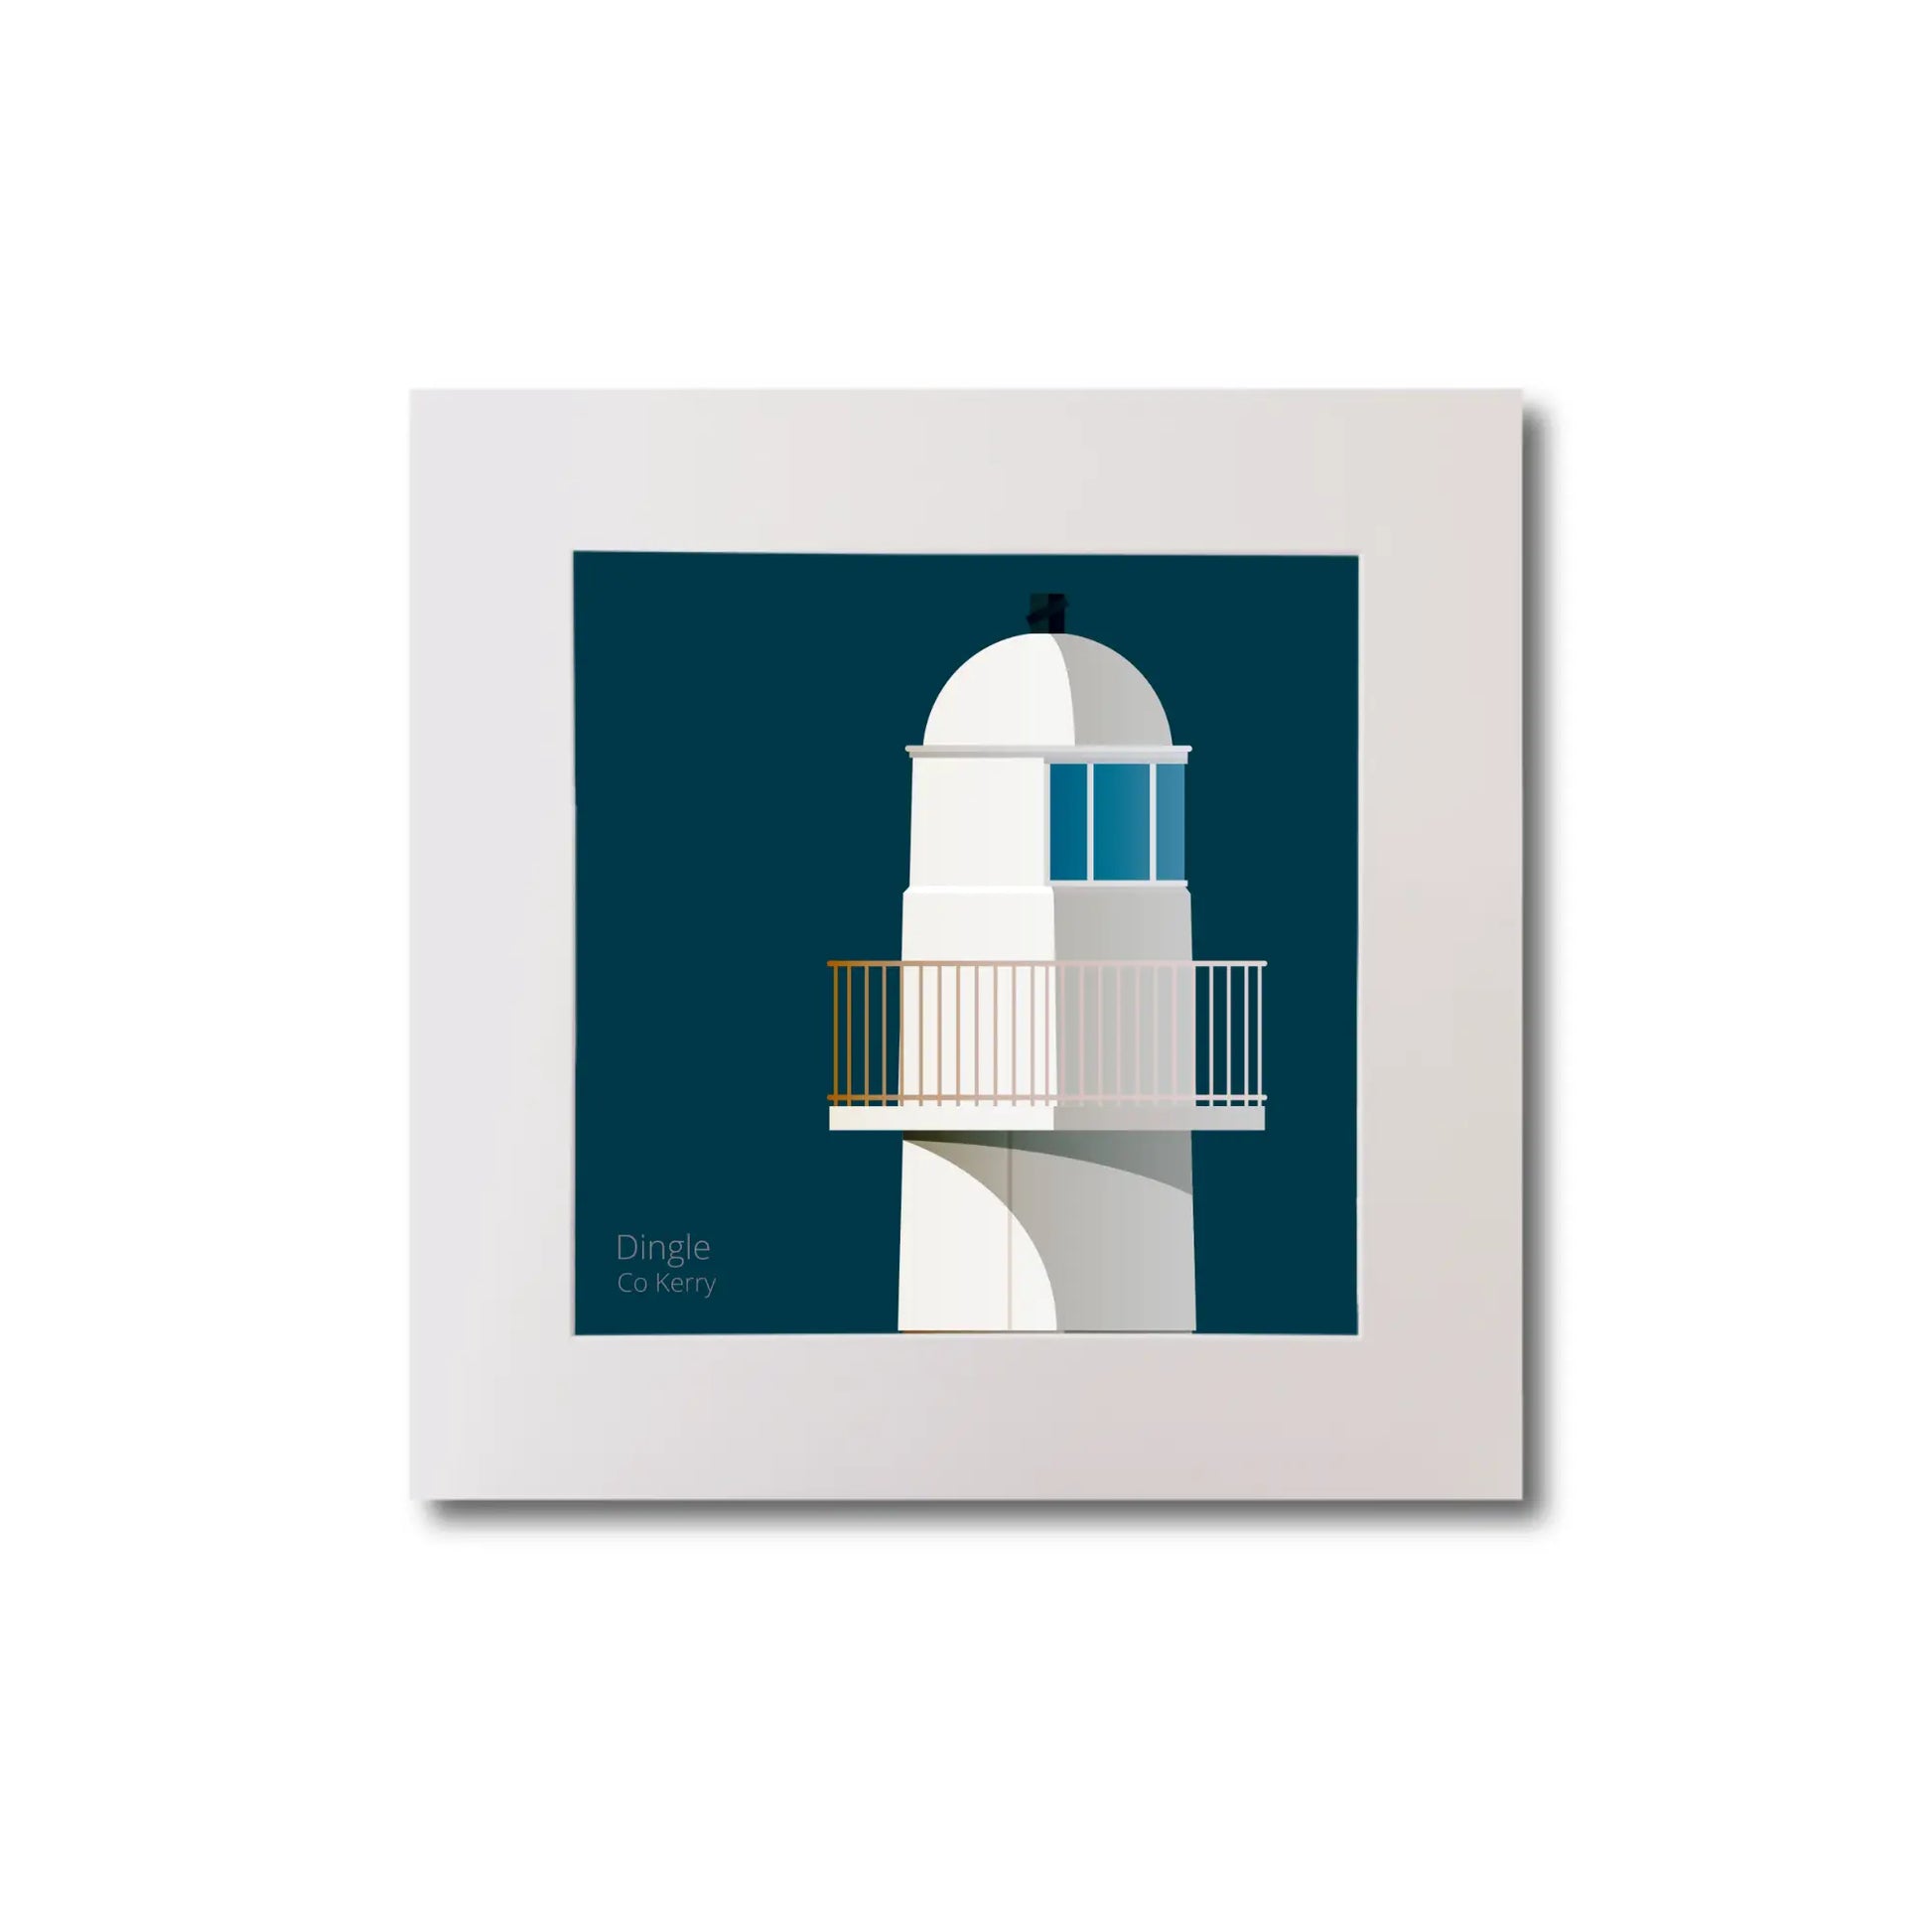 Illustration of Dingle lighthouse on a midnight blue background, mounted and measuring 20x20cm.